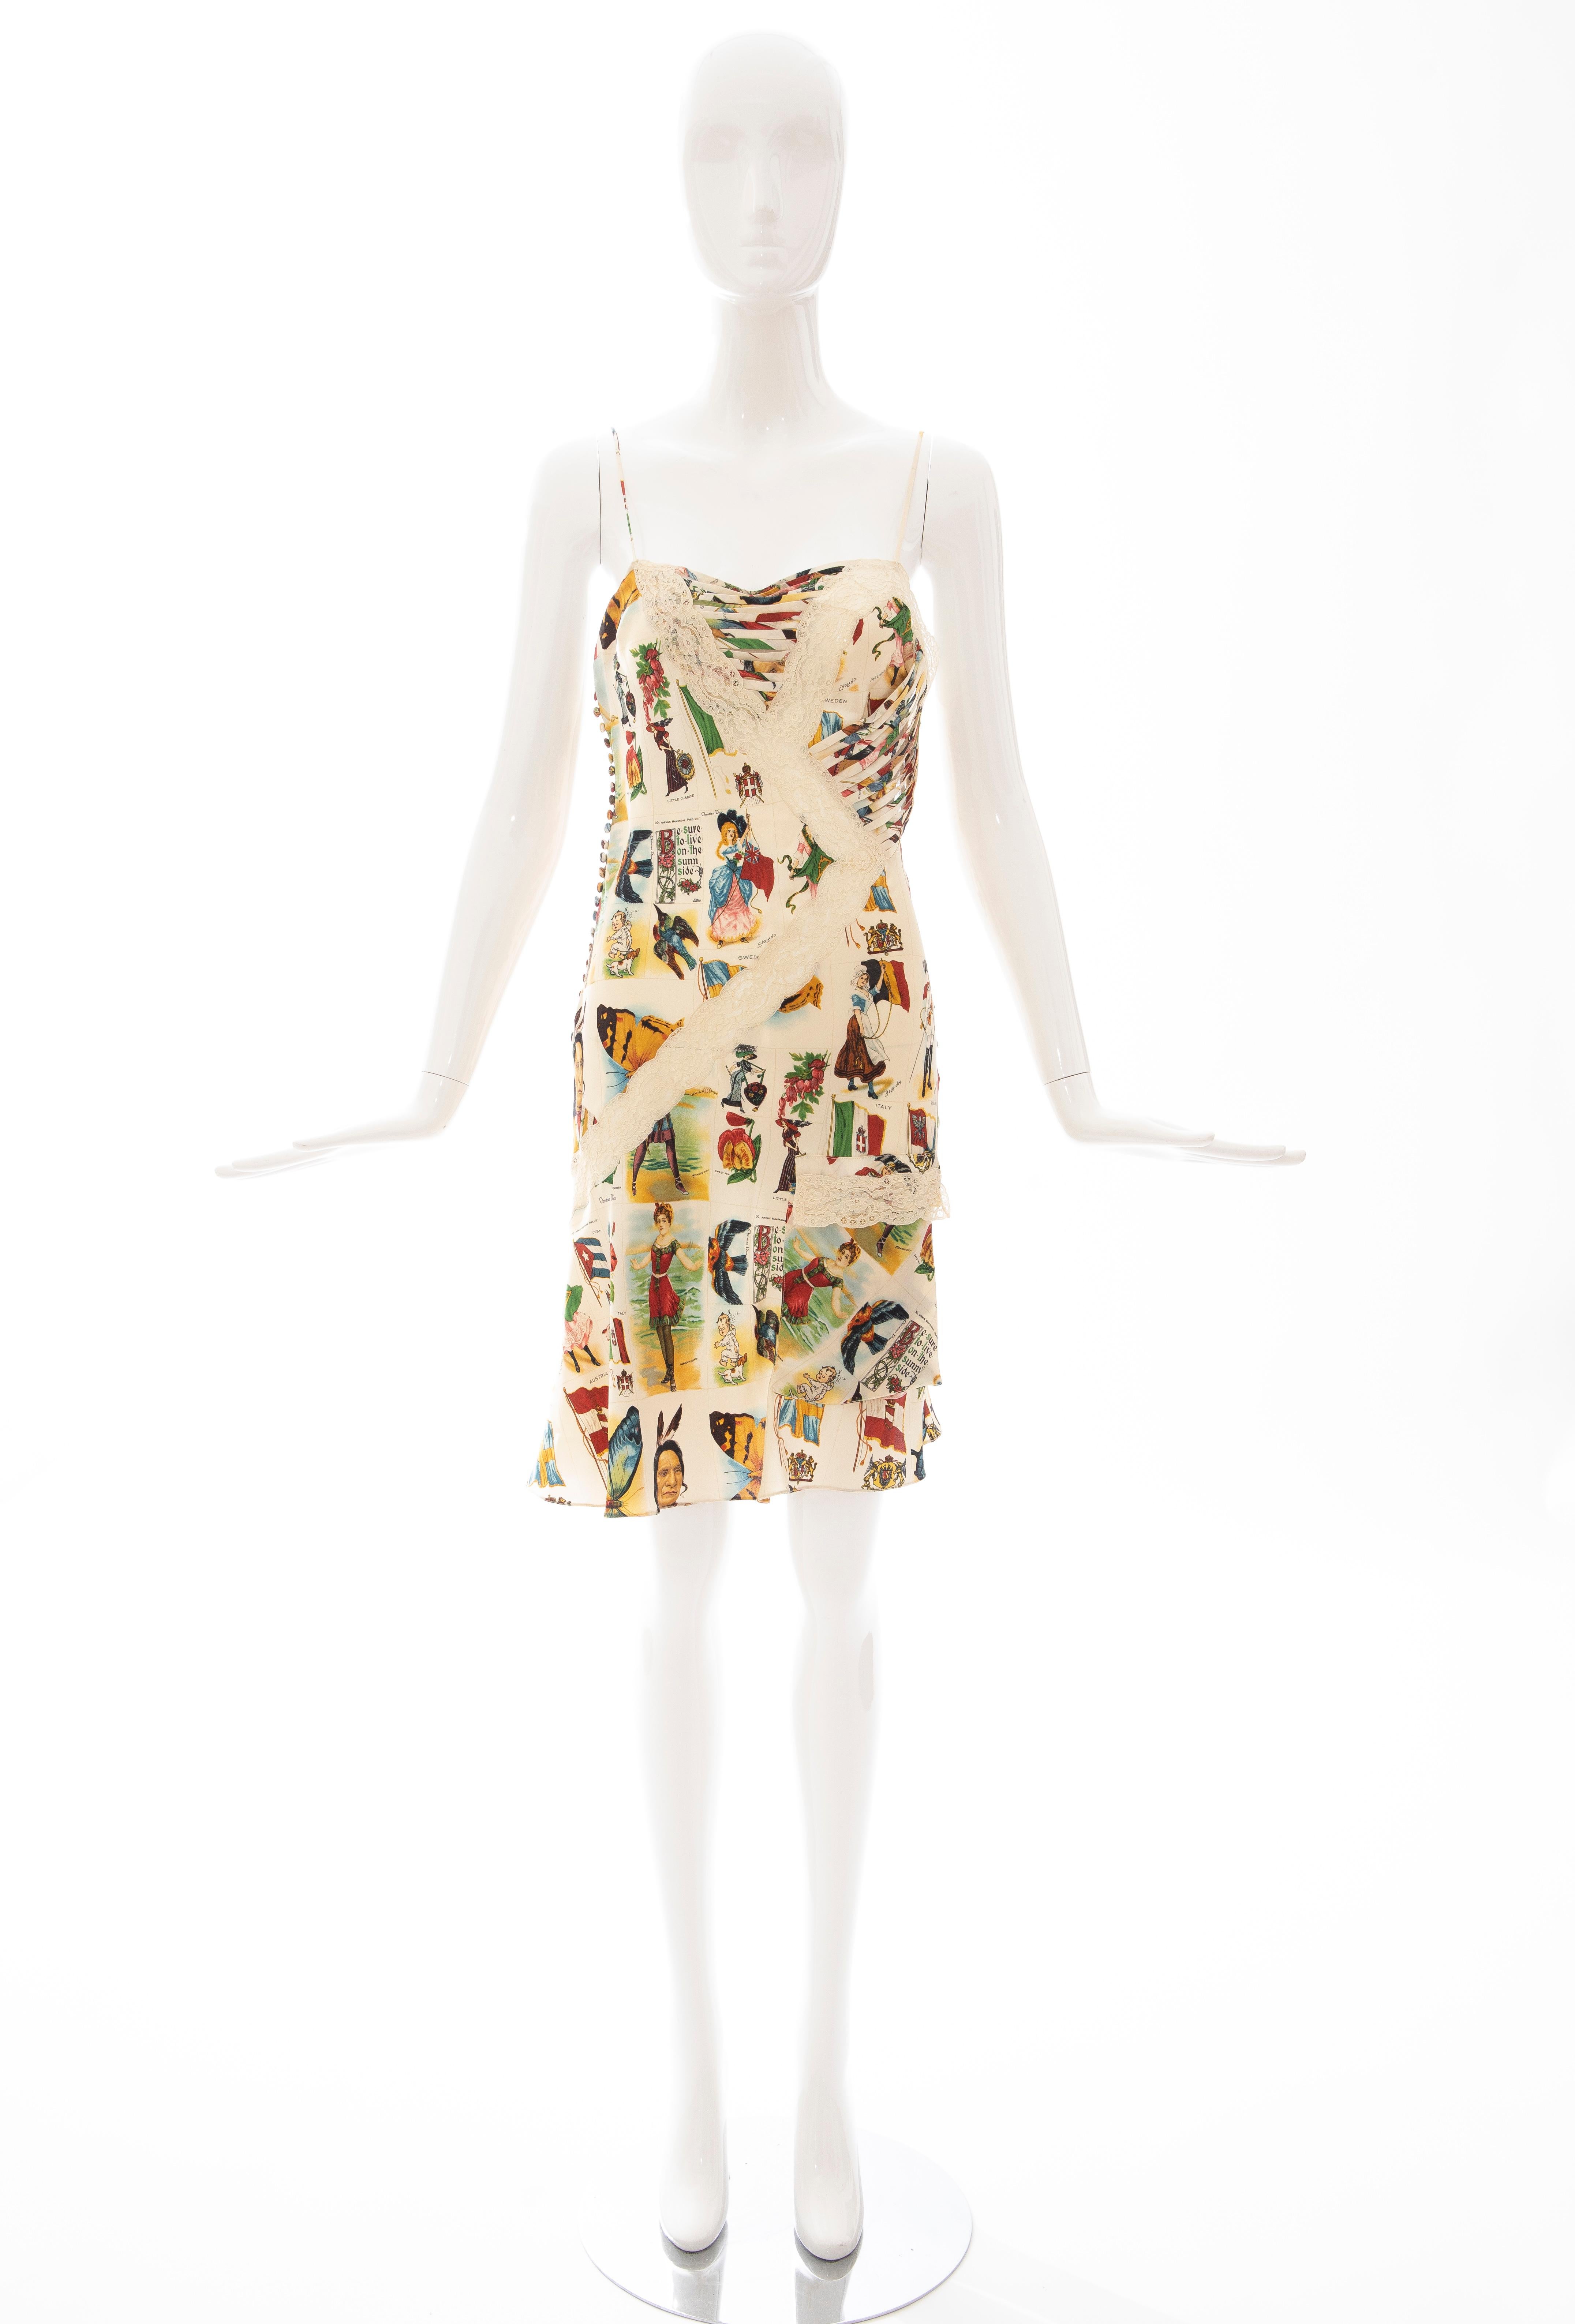 John Galliano for Christian Dior Runway, Spring 2002, silk and lace printed dress with all-over Americana & butterfly stamps, spaghetti straps, cutout accents, single flap pocket and multi-button closures at side. 

FR. 38, US. 6

Bust: 30, Waist: